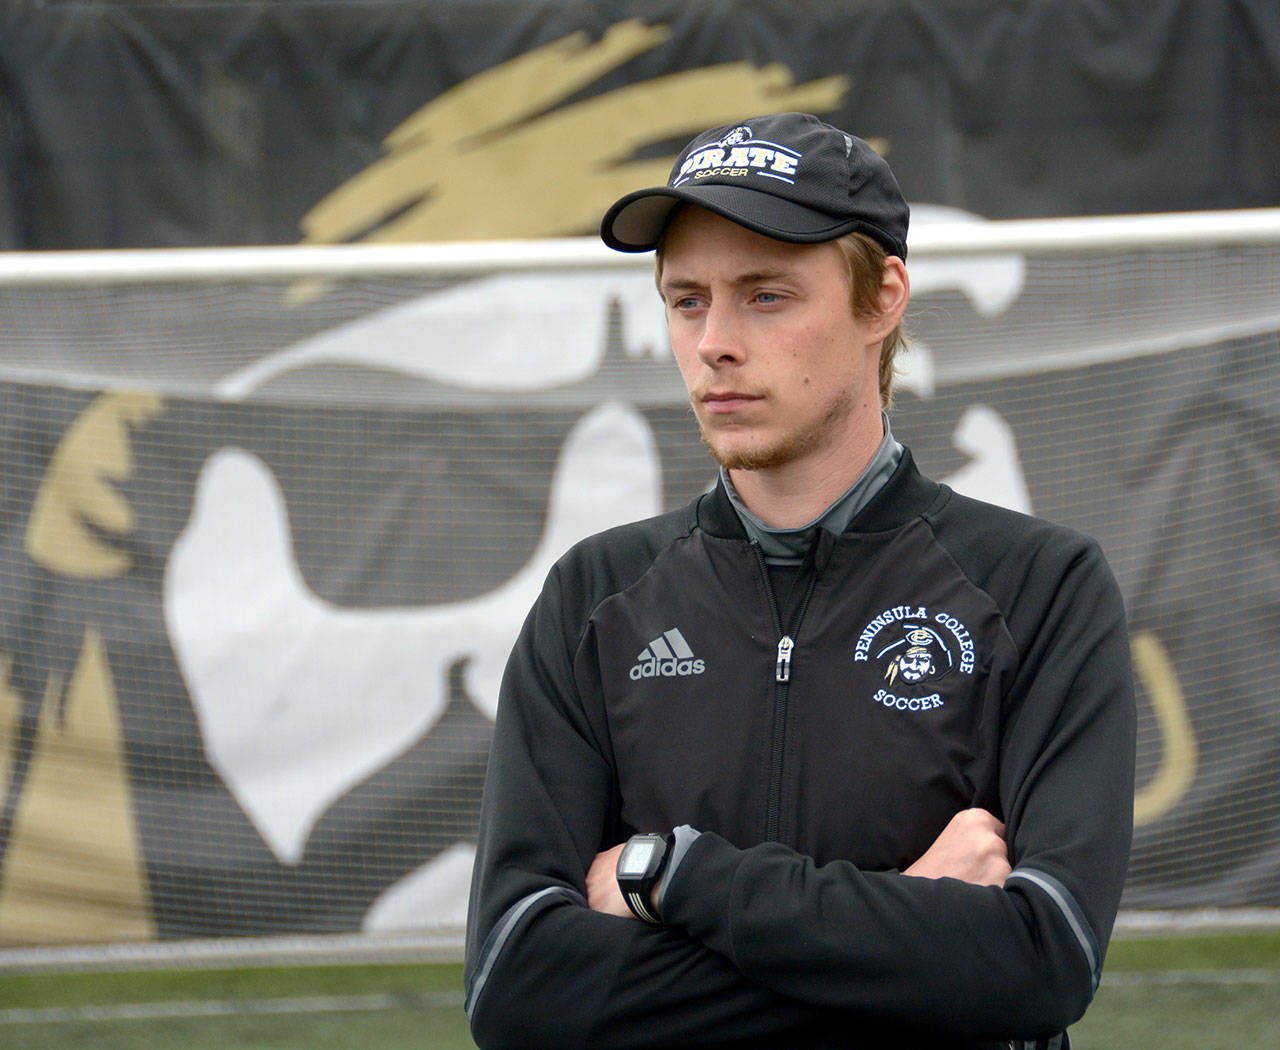 Peninsula College Athletics Jake Hughes, a former Peninsula College men’s soccer player and assistant coach, has been selected as the new head coach of the Pirate men’s team.